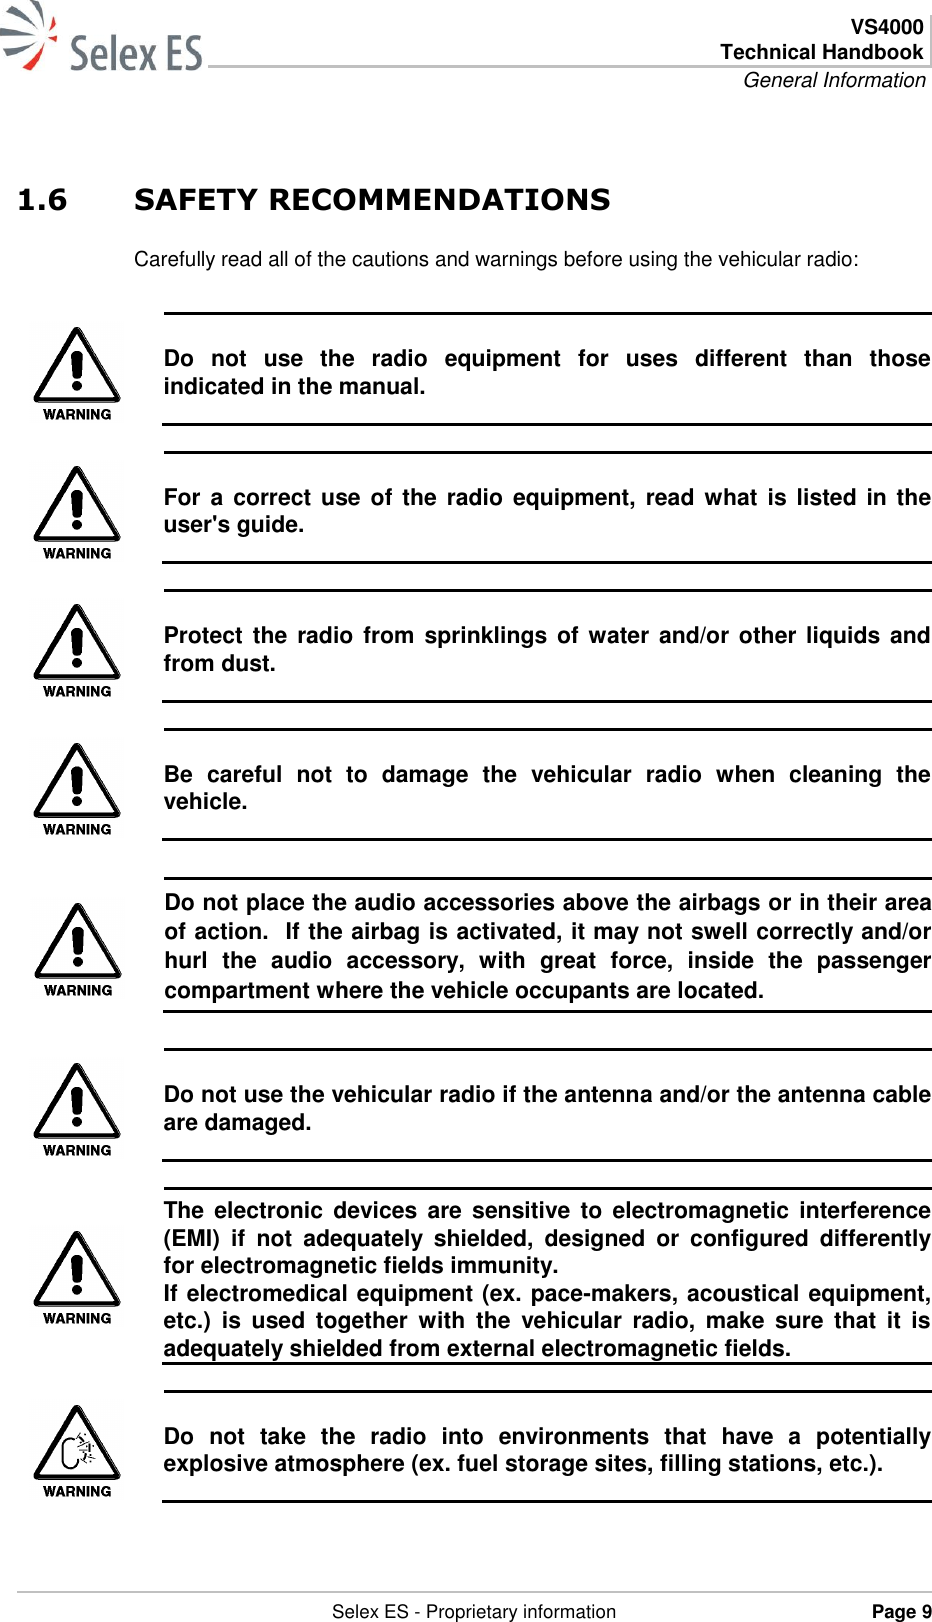  VS4000 Technical Handbook General Information   Selex ES - Proprietary information Page 9  1.6 SAFETY RECOMMENDATIONS Carefully read all of the cautions and warnings before using the vehicular radio:   Do  not  use  the  radio  equipment  for  uses  different  than  those indicated in the manual.   For a correct  use  of  the radio equipment, read  what  is listed in  the user&apos;s guide.   Protect the radio  from  sprinklings of water  and/or other  liquids and from dust.   Be  careful  not  to  damage  the  vehicular  radio  when  cleaning  the vehicle.   Do not place the audio accessories above the airbags or in their area of action.  If the airbag is activated, it may not swell correctly and/or hurl  the  audio  accessory,  with  great  force,  inside  the  passenger compartment where the vehicle occupants are located.   Do not use the vehicular radio if the antenna and/or the antenna cable are damaged.   The electronic  devices are  sensitive to  electromagnetic  interference (EMI)  if  not  adequately  shielded,  designed  or  configured  differently for electromagnetic fields immunity. If electromedical equipment (ex. pace-makers, acoustical equipment, etc.)  is  used  together  with  the  vehicular  radio,  make  sure that  it  is adequately shielded from external electromagnetic fields.   Do  not  take  the  radio  into  environments  that  have  a  potentially explosive atmosphere (ex. fuel storage sites, filling stations, etc.).  